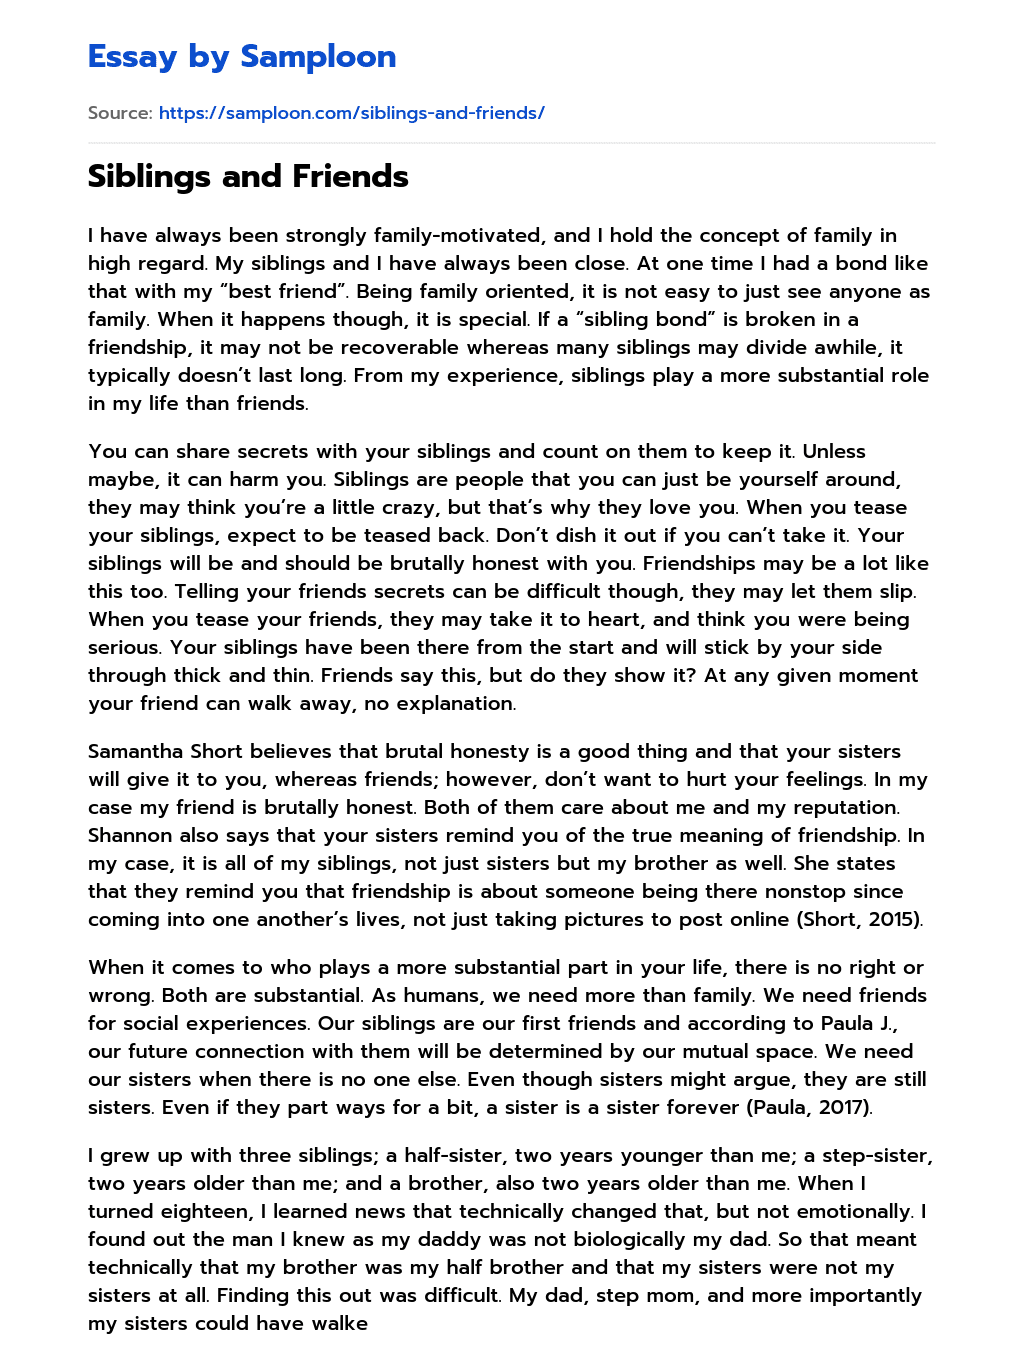 Siblings and Friends essay